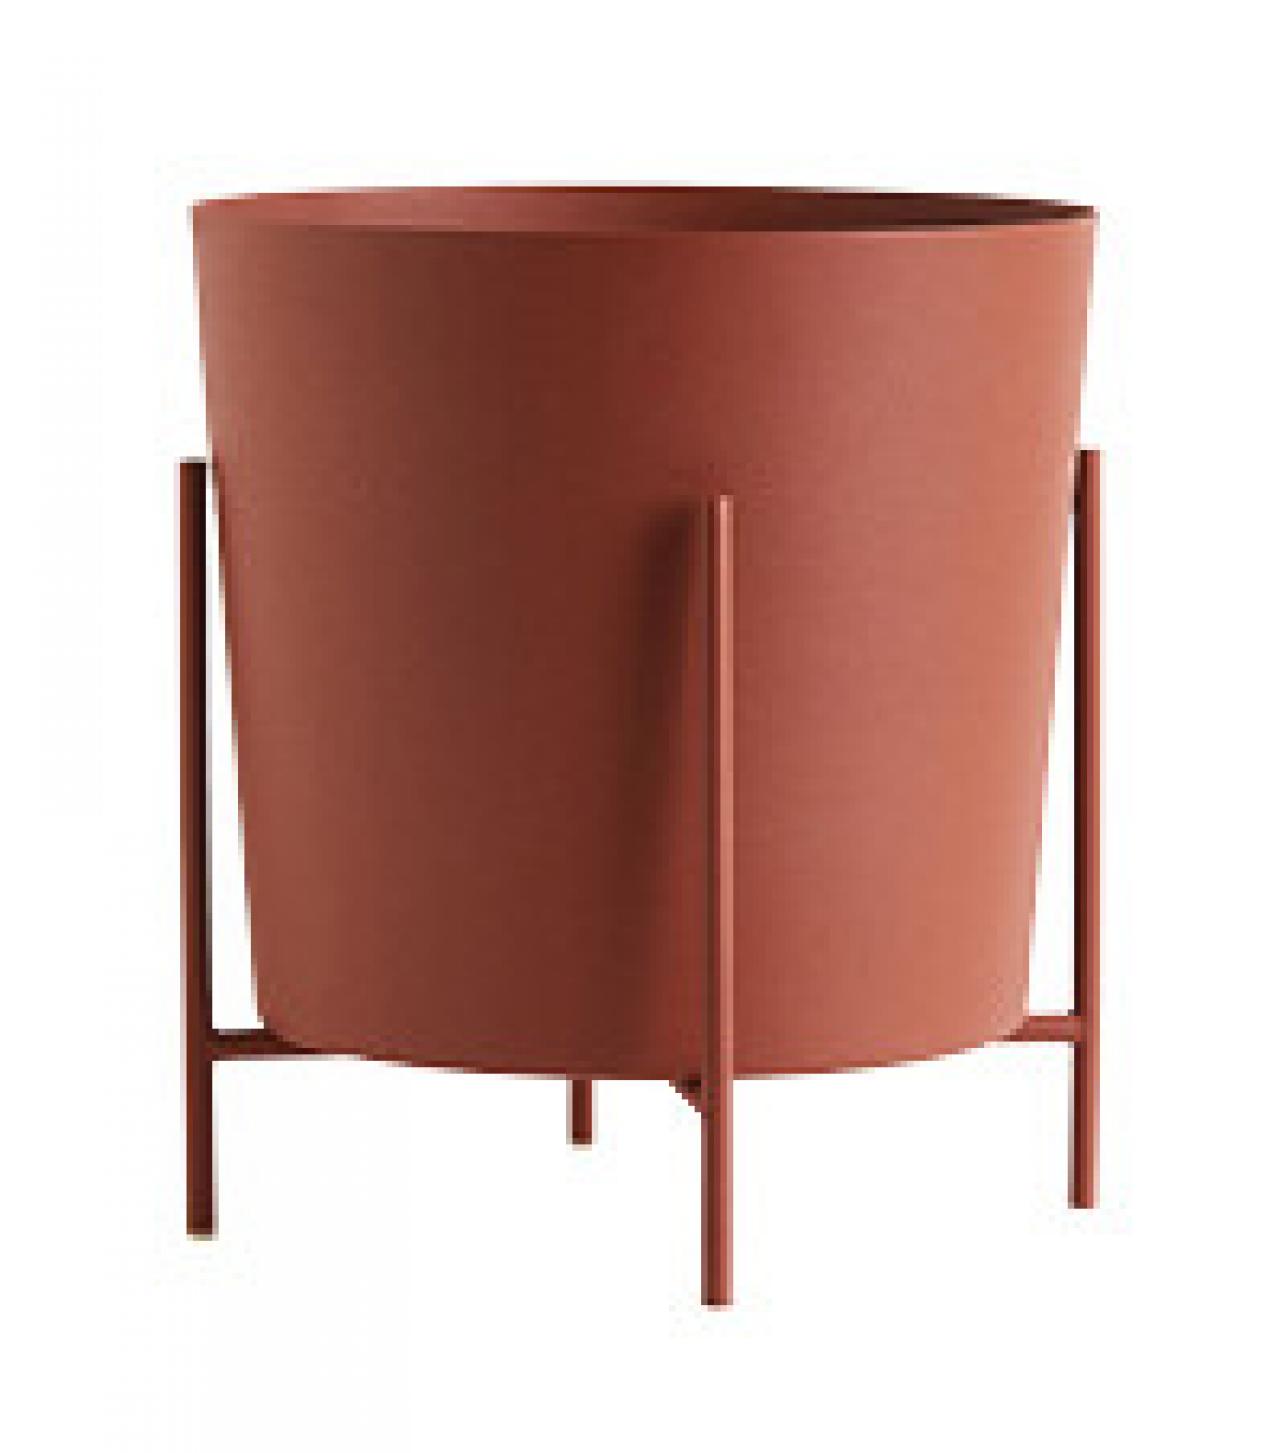 Grote bloempot - € 49,99 - H&M Home.